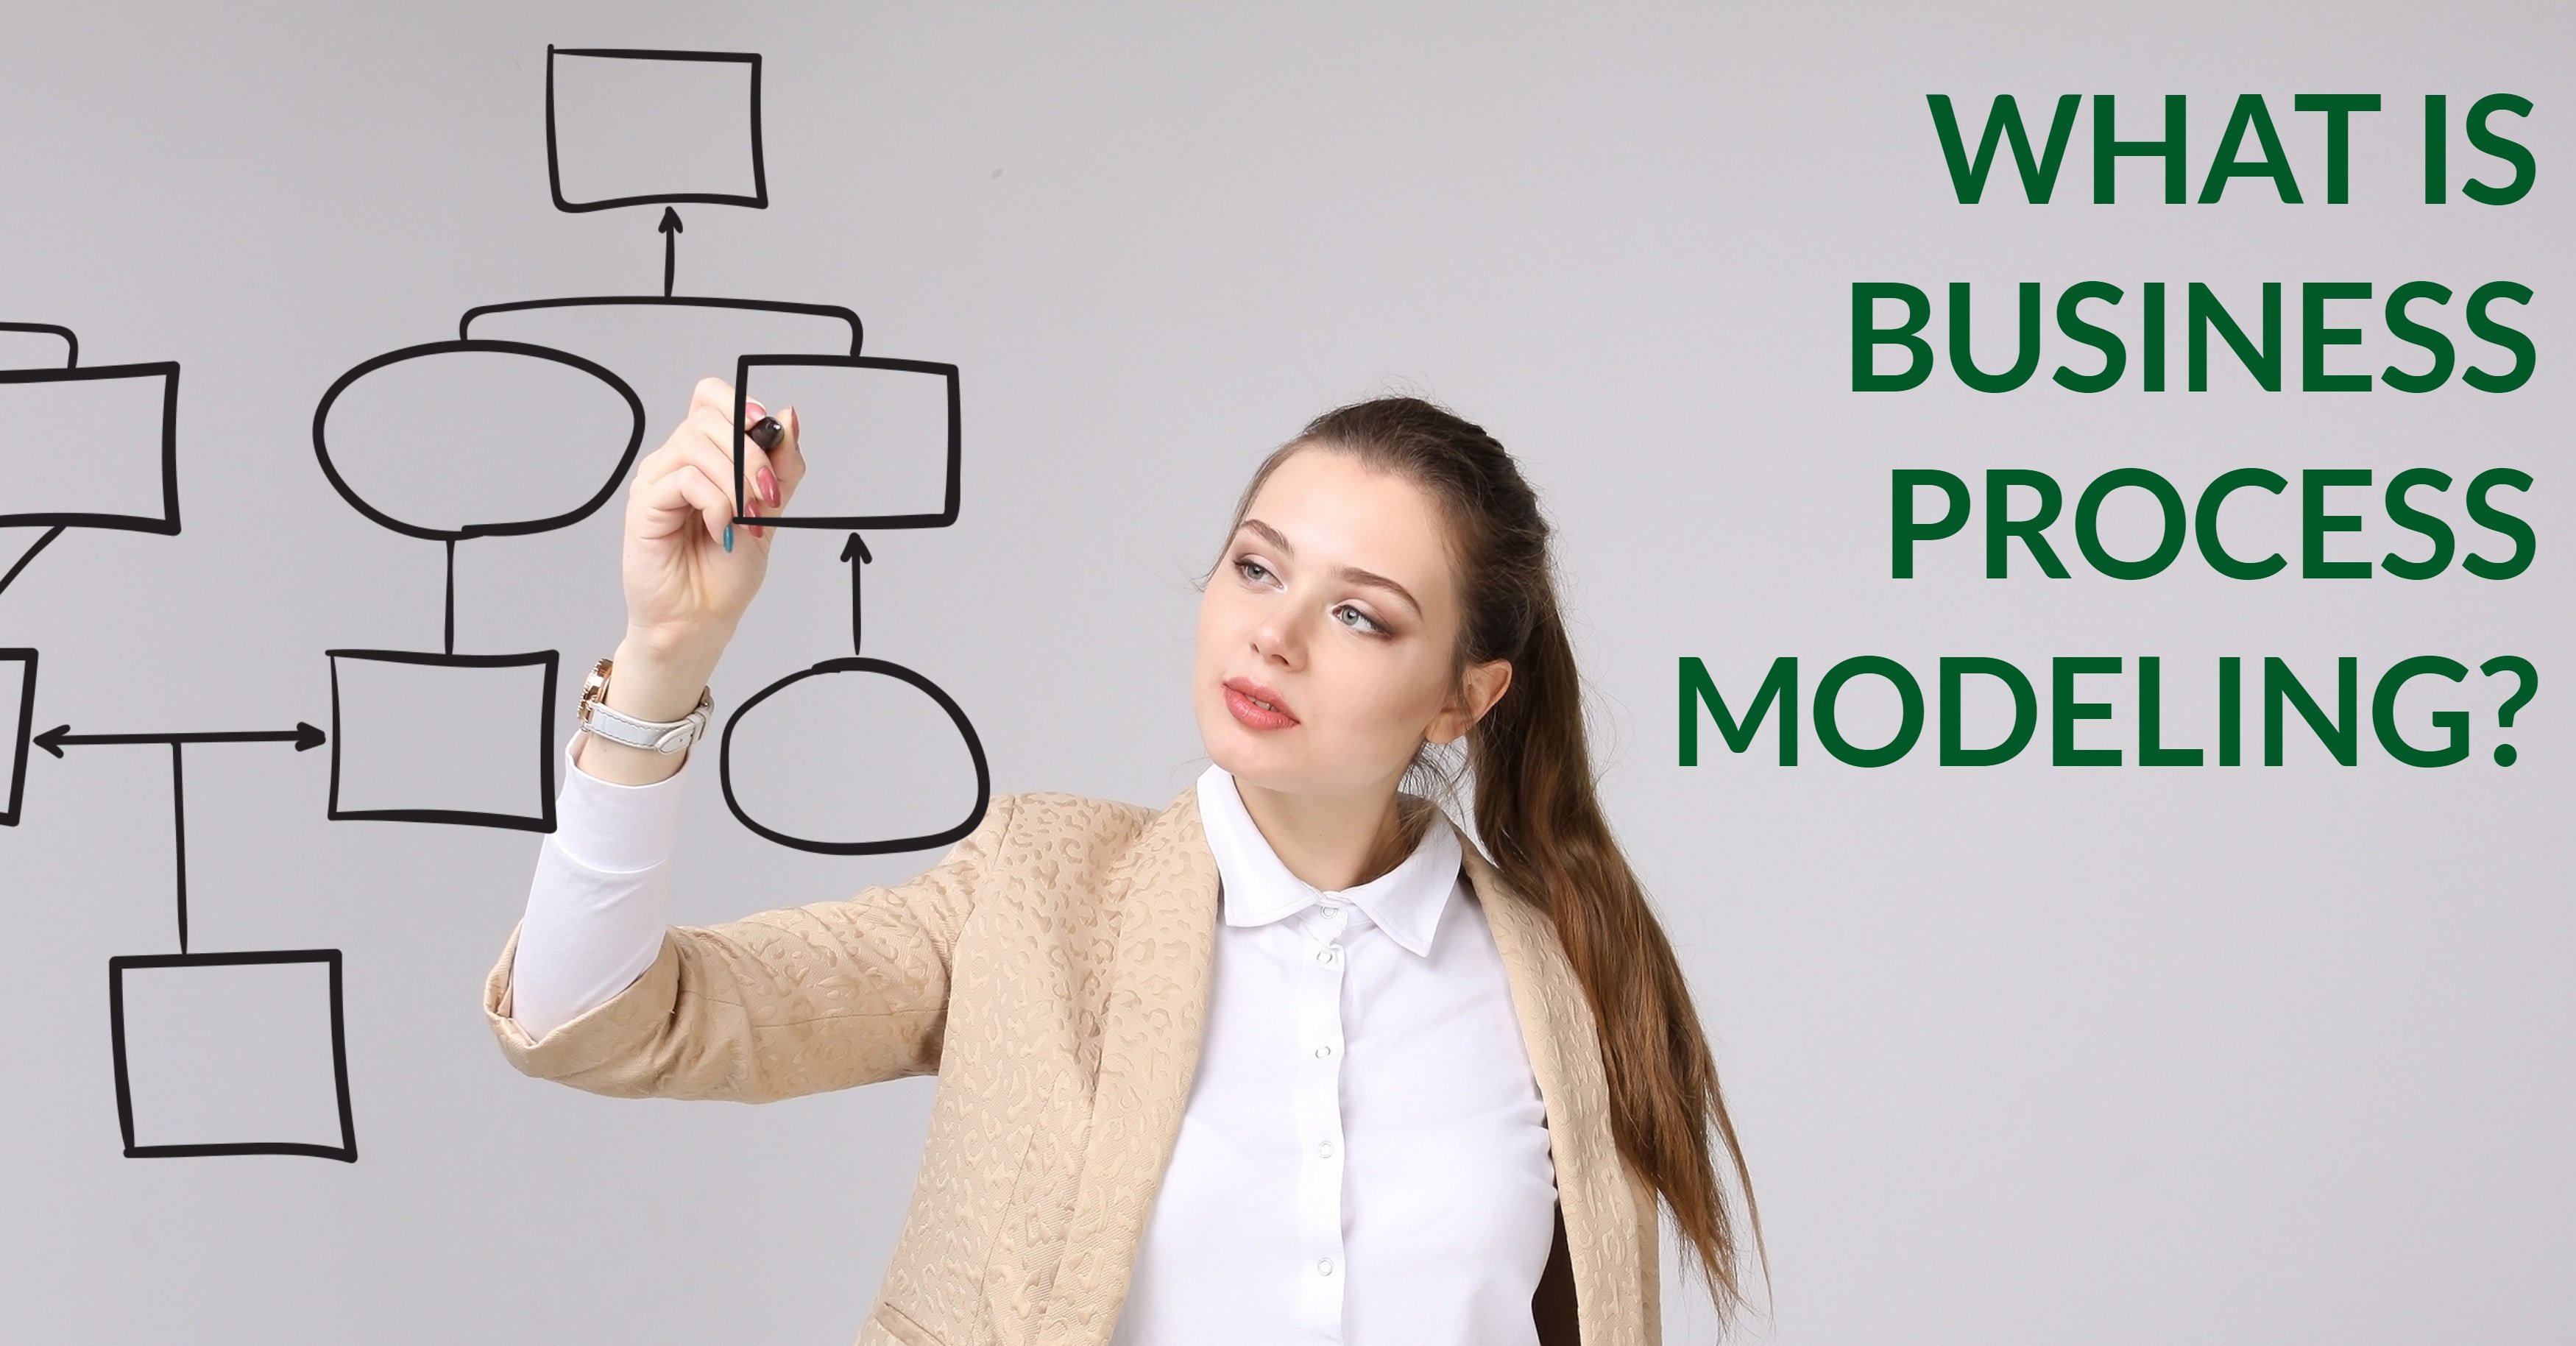 What is Business Process Modeling?